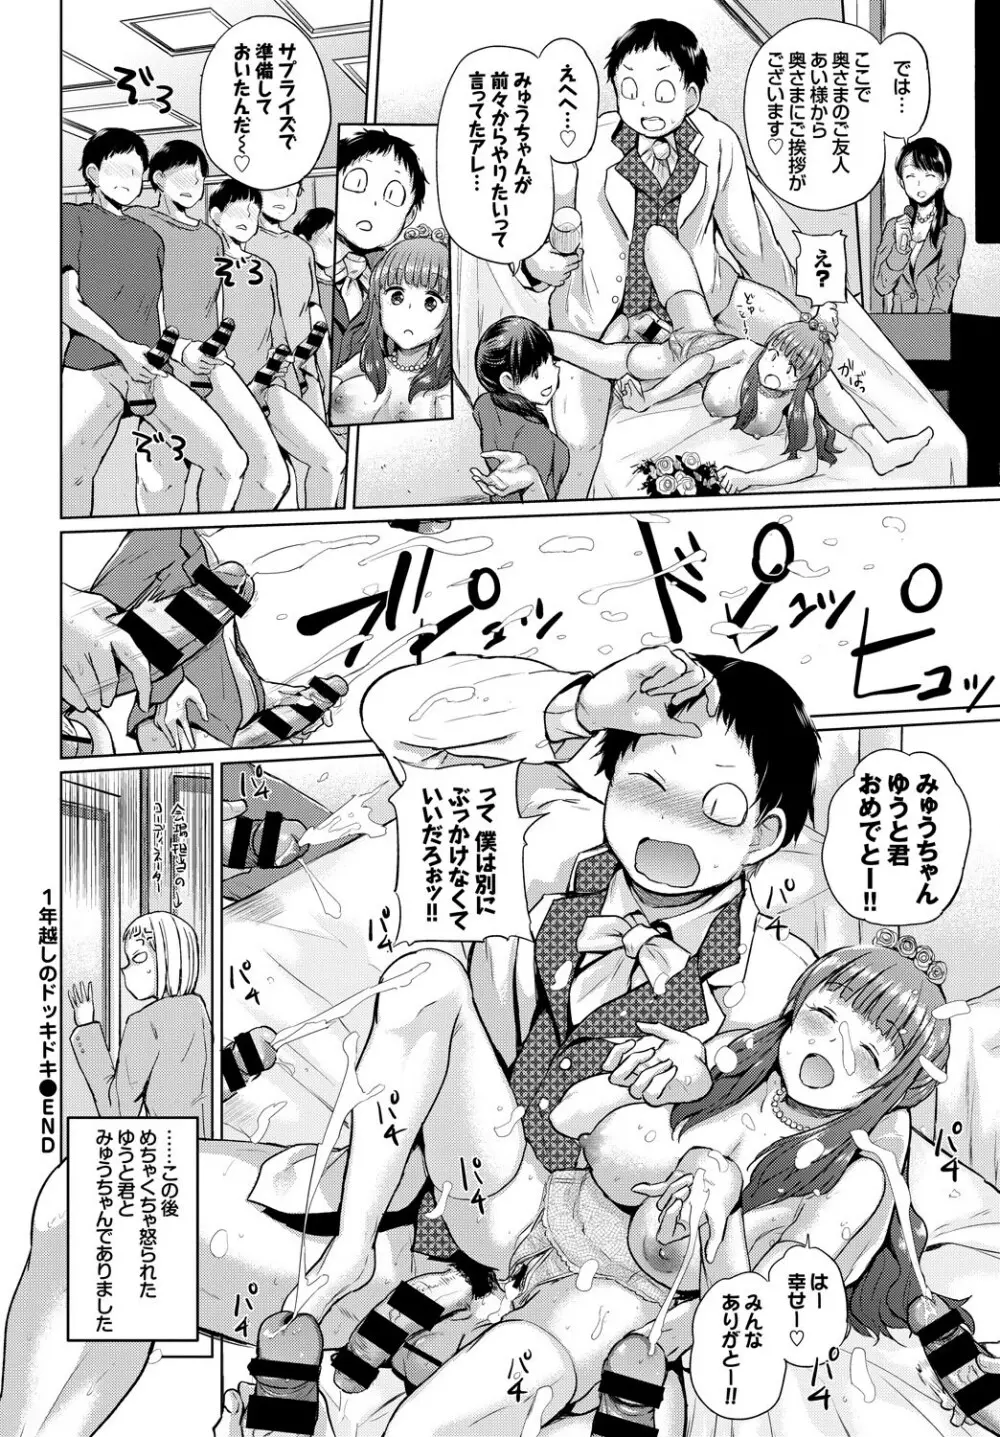 COMIC BAVEL SPECIAL COLLECTION VOL.8 78ページ